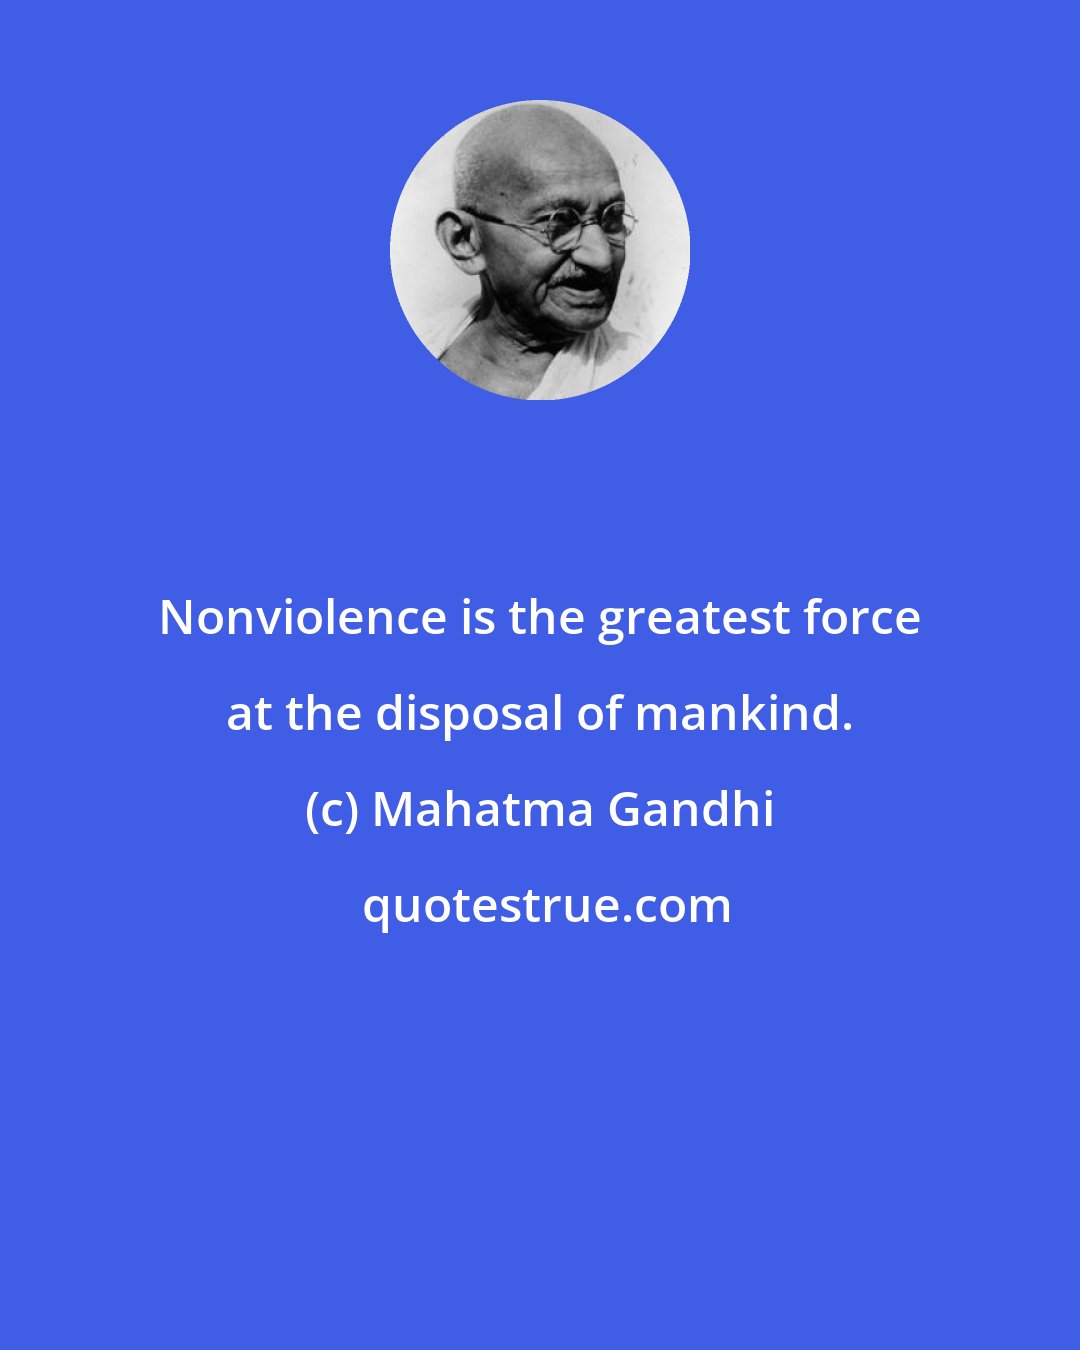 Mahatma Gandhi: Nonviolence is the greatest force at the disposal of mankind.